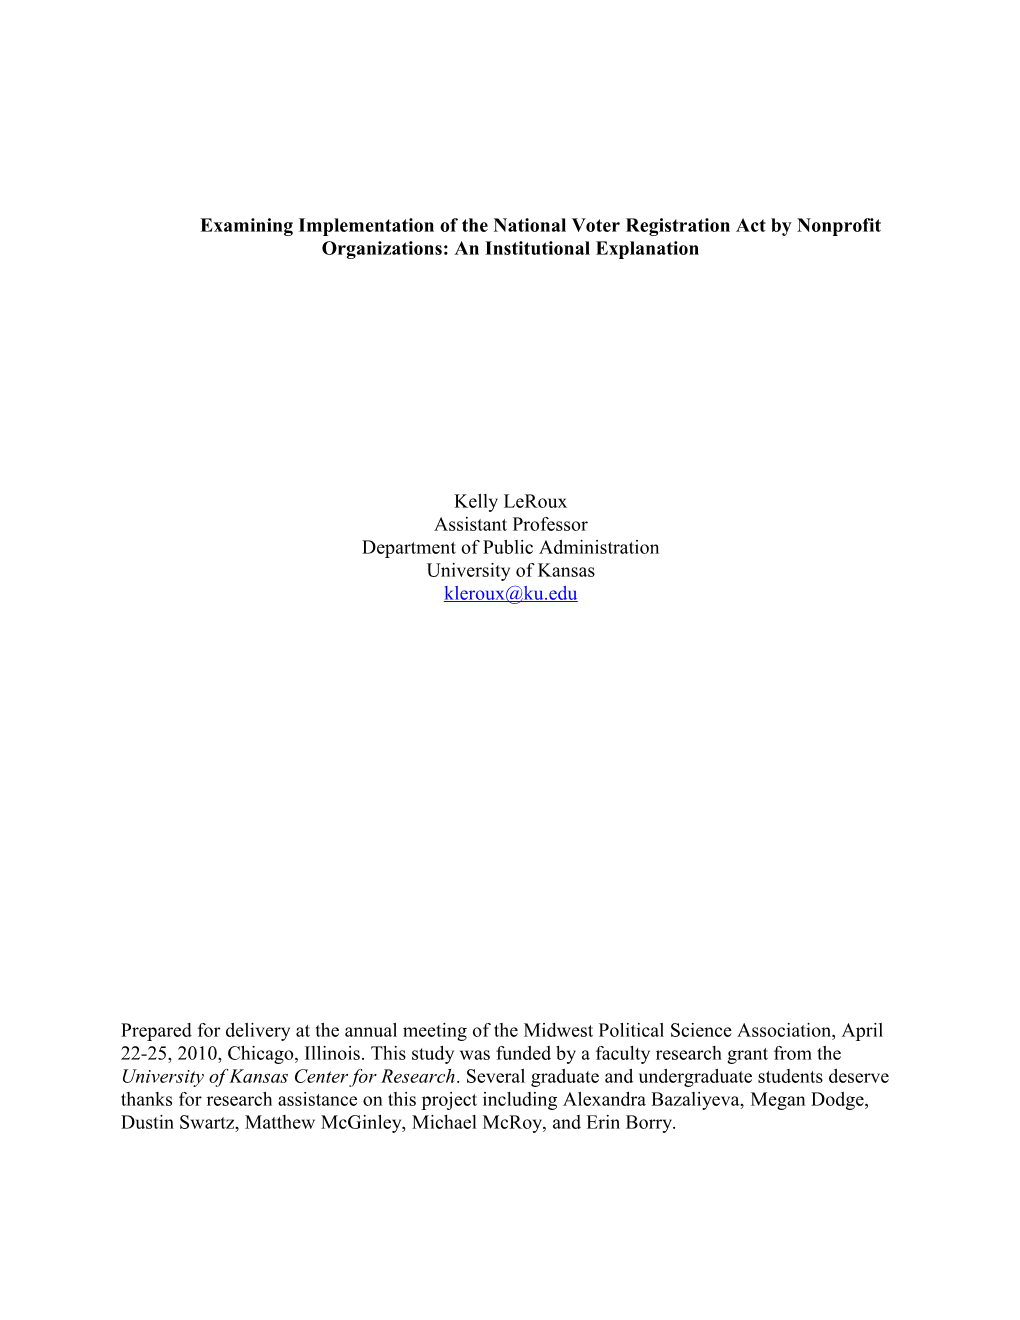 Examining Implementation of the National Voter Registration Act by Nonprofit Organizations